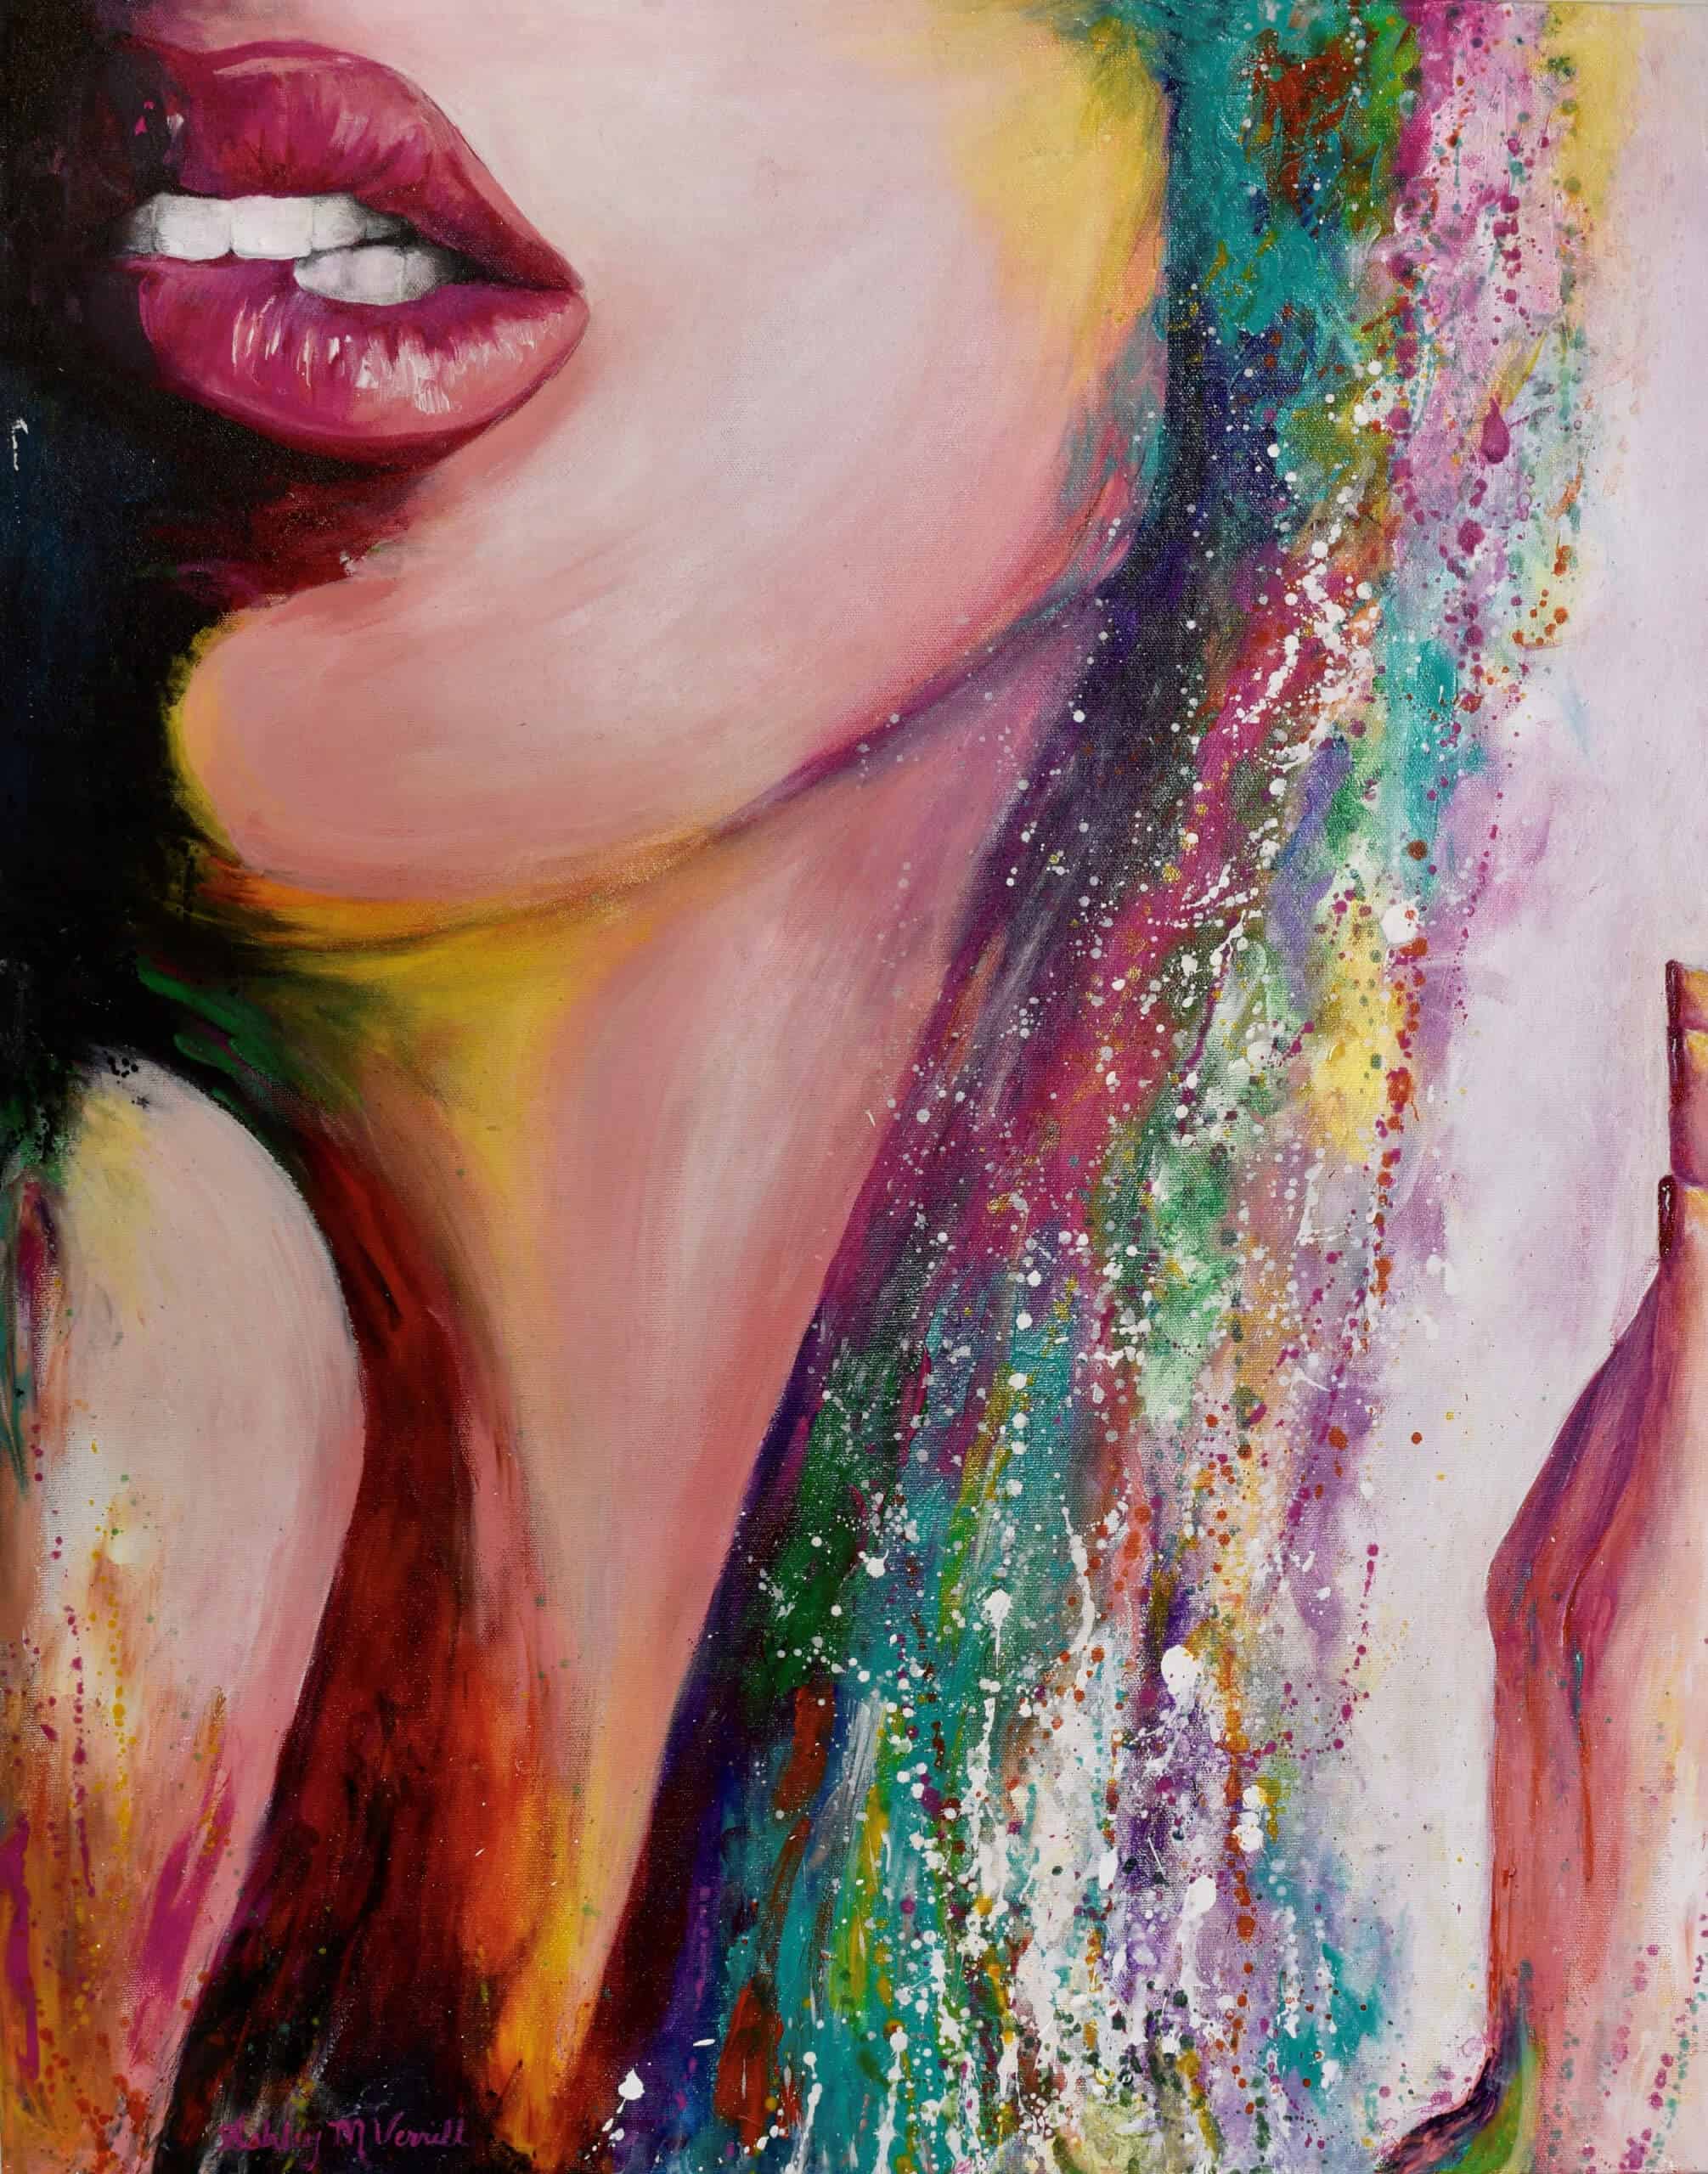 A Colorful Abstract Portrait of Woman Biting Lip